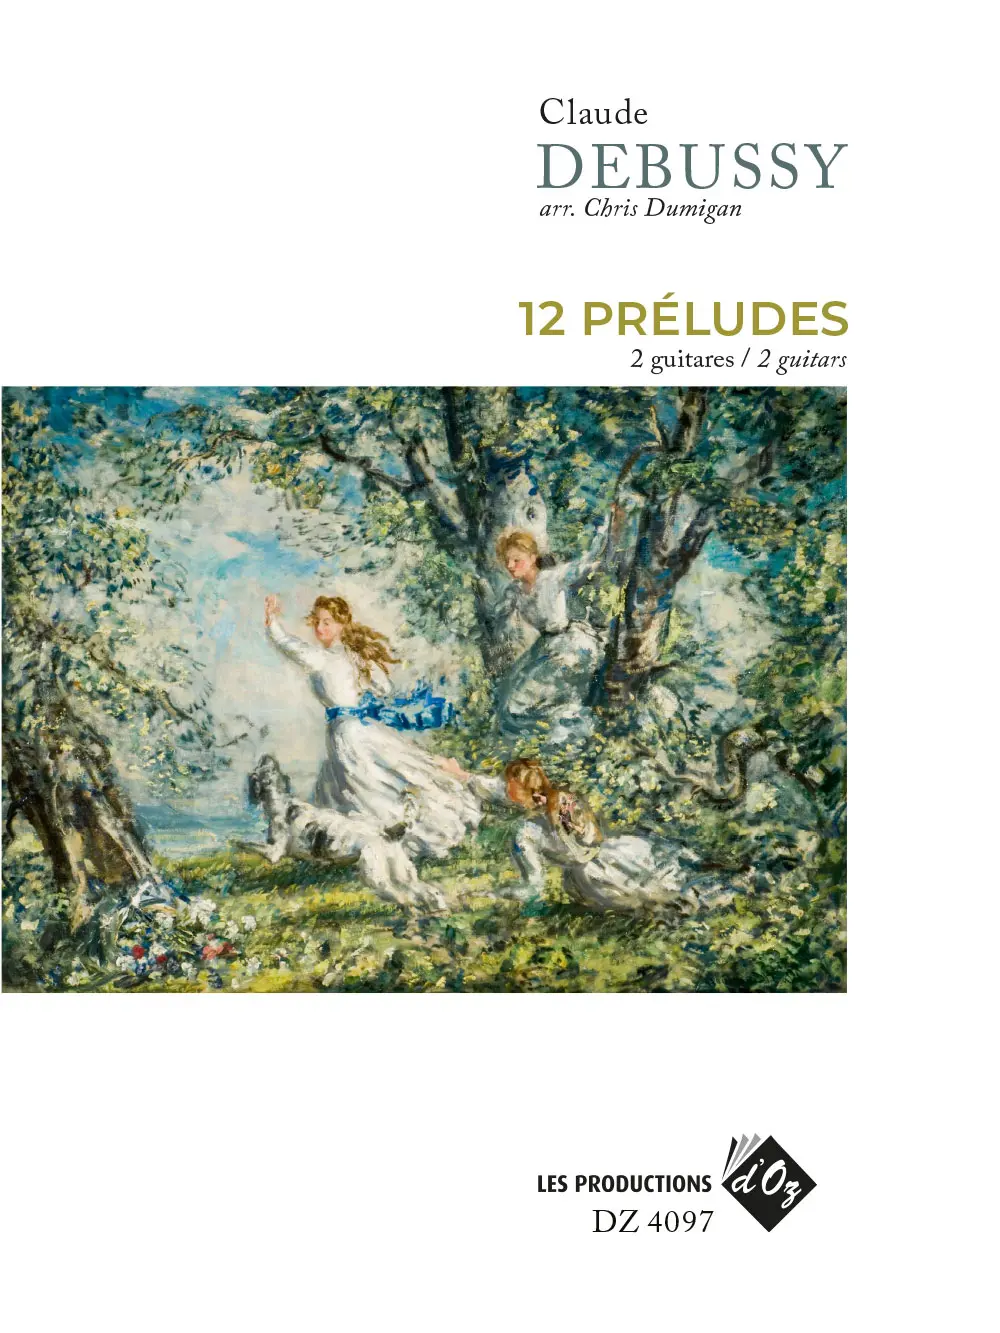 Debussy: 12 Preludes for two guitars